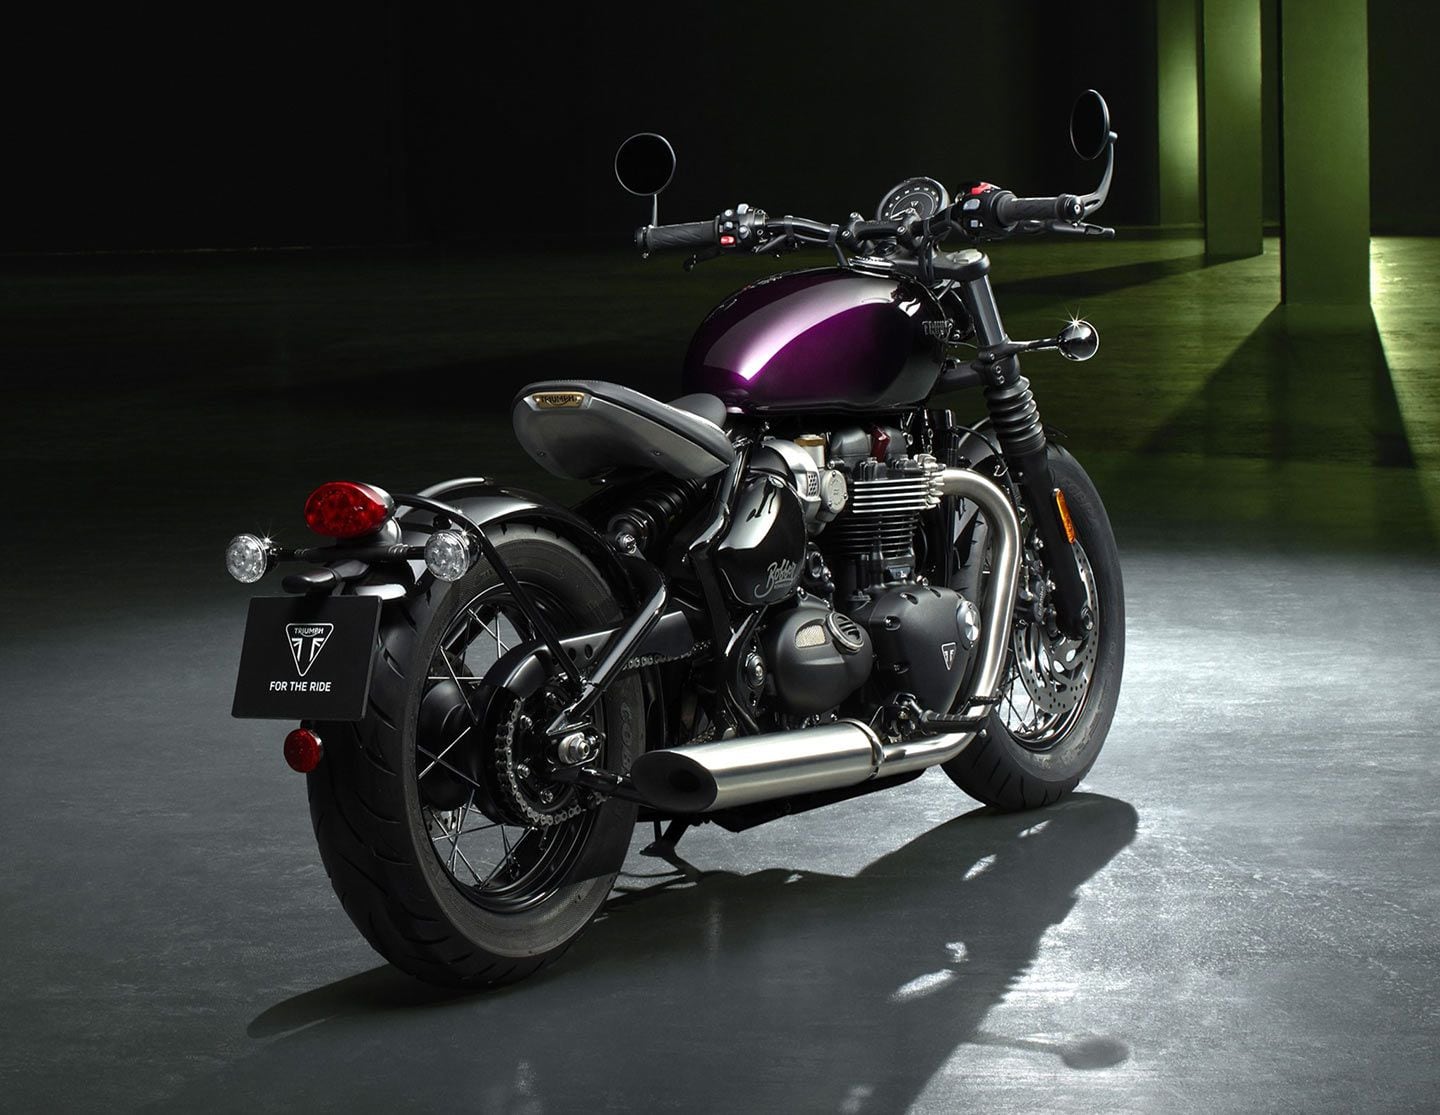 The Bonneville Bobber Purple Stealth Edition plays on the bike’s stripped-back style with a deep purple color.